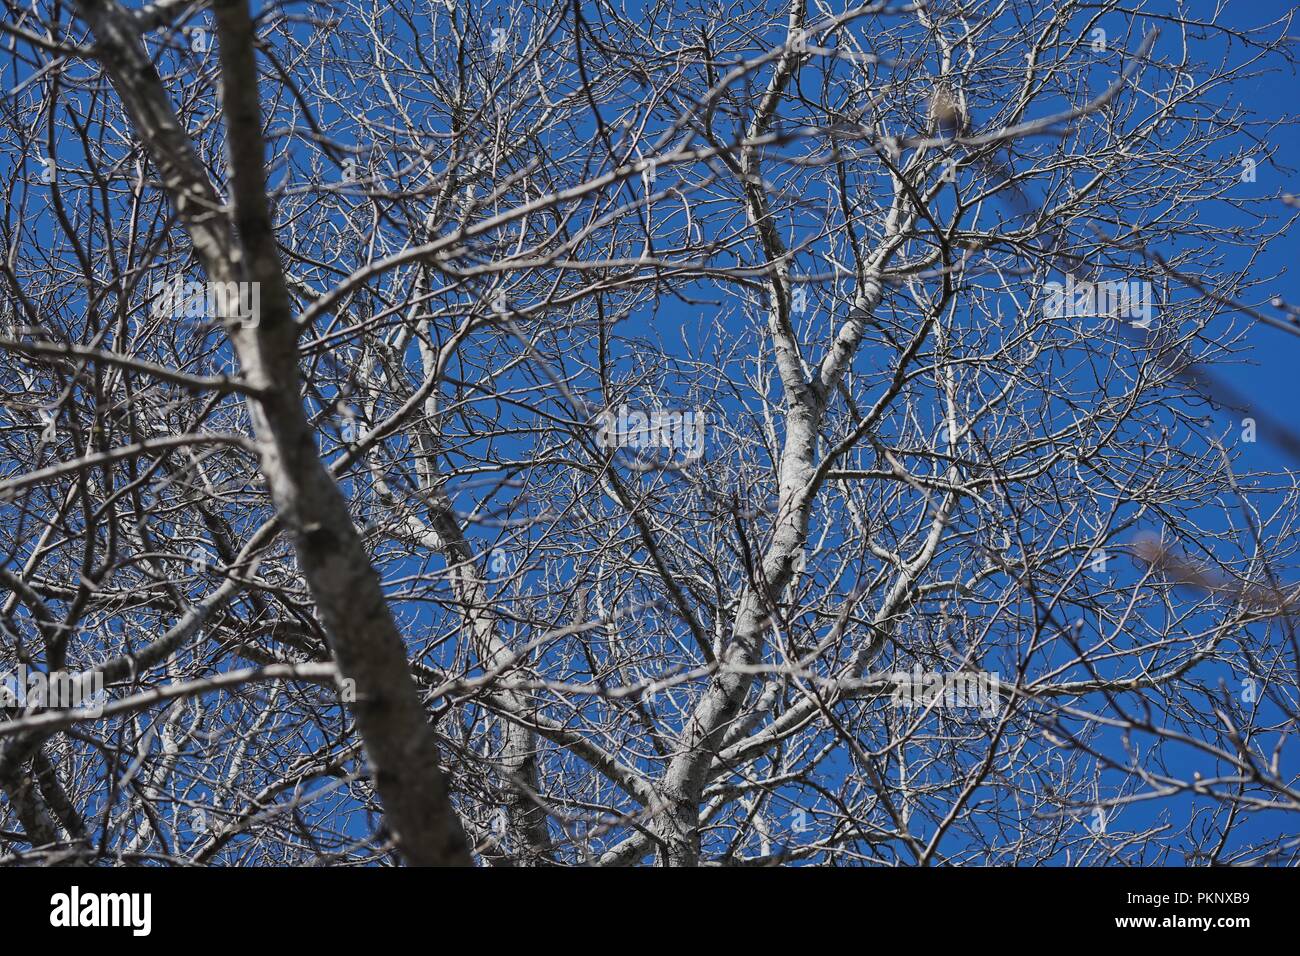 Looking up into the bare Winter canopy of a mature Liquidambar tree, with clear blue sky showing between the branches. Stock Photo